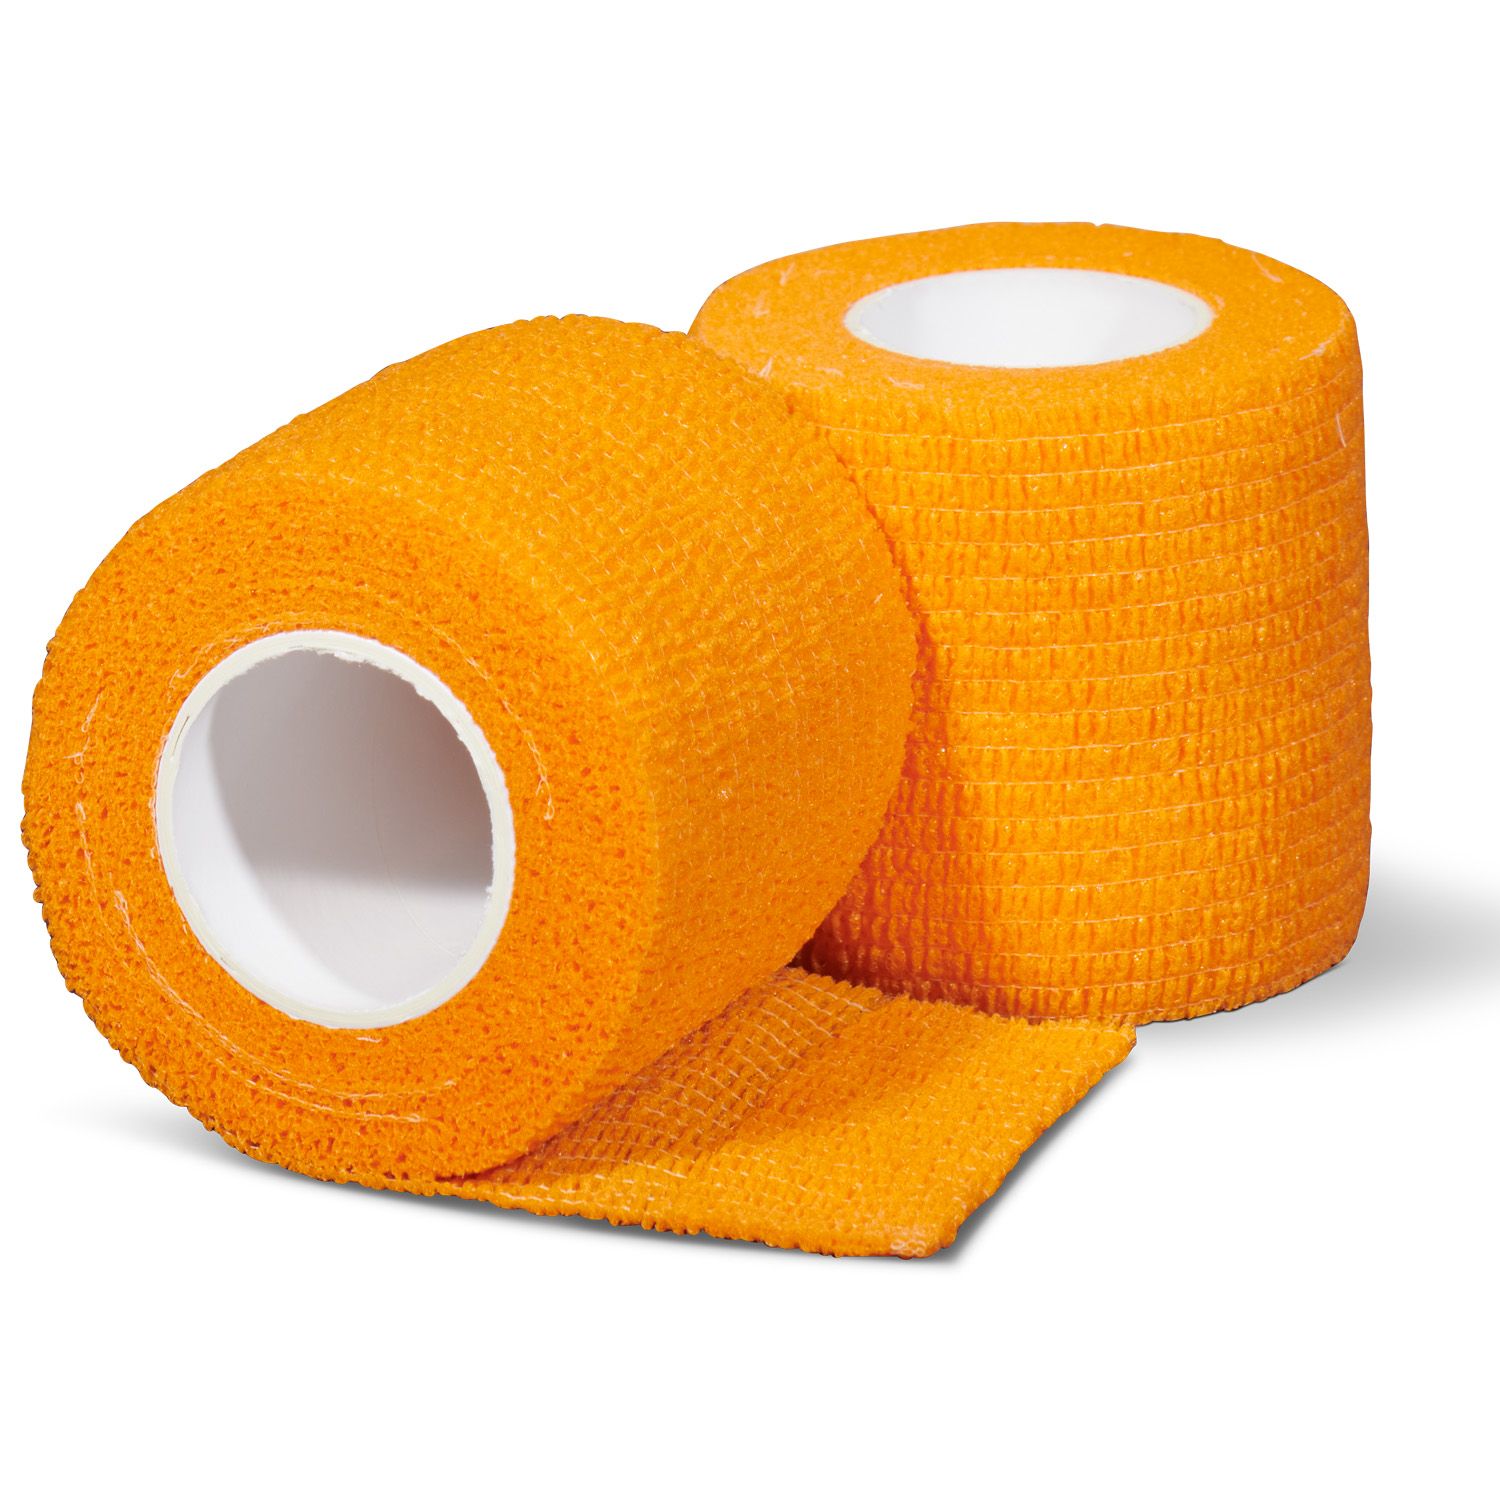 gladiator sports underwrap bandage per roll orange frond and back view